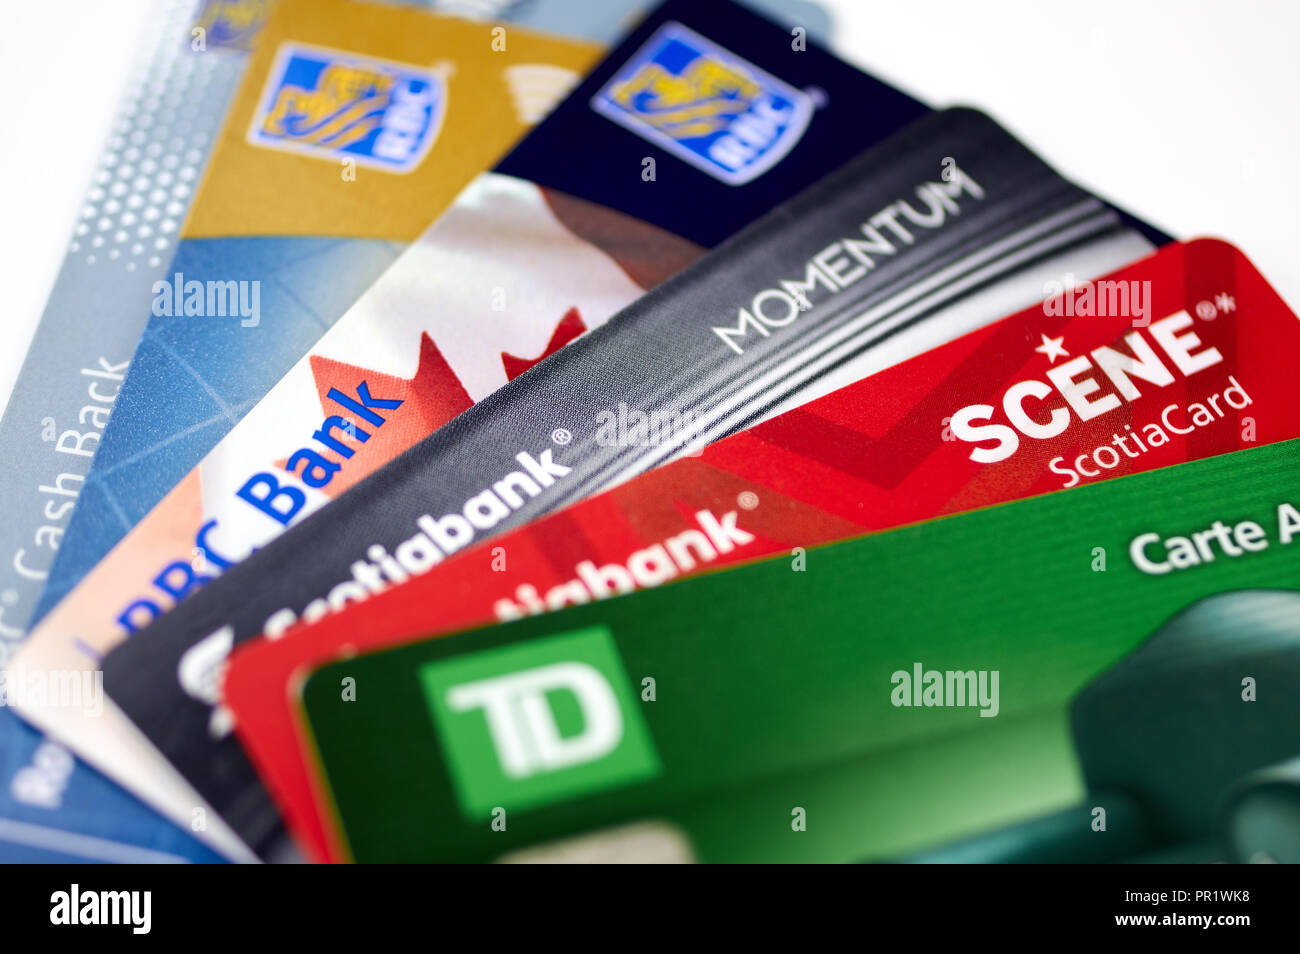 MONTREAL, CANADA - SEPTEMBER 21, 2018: Credit cards of different canadian banks. Scotiabank, RBC and TD Stock Photo